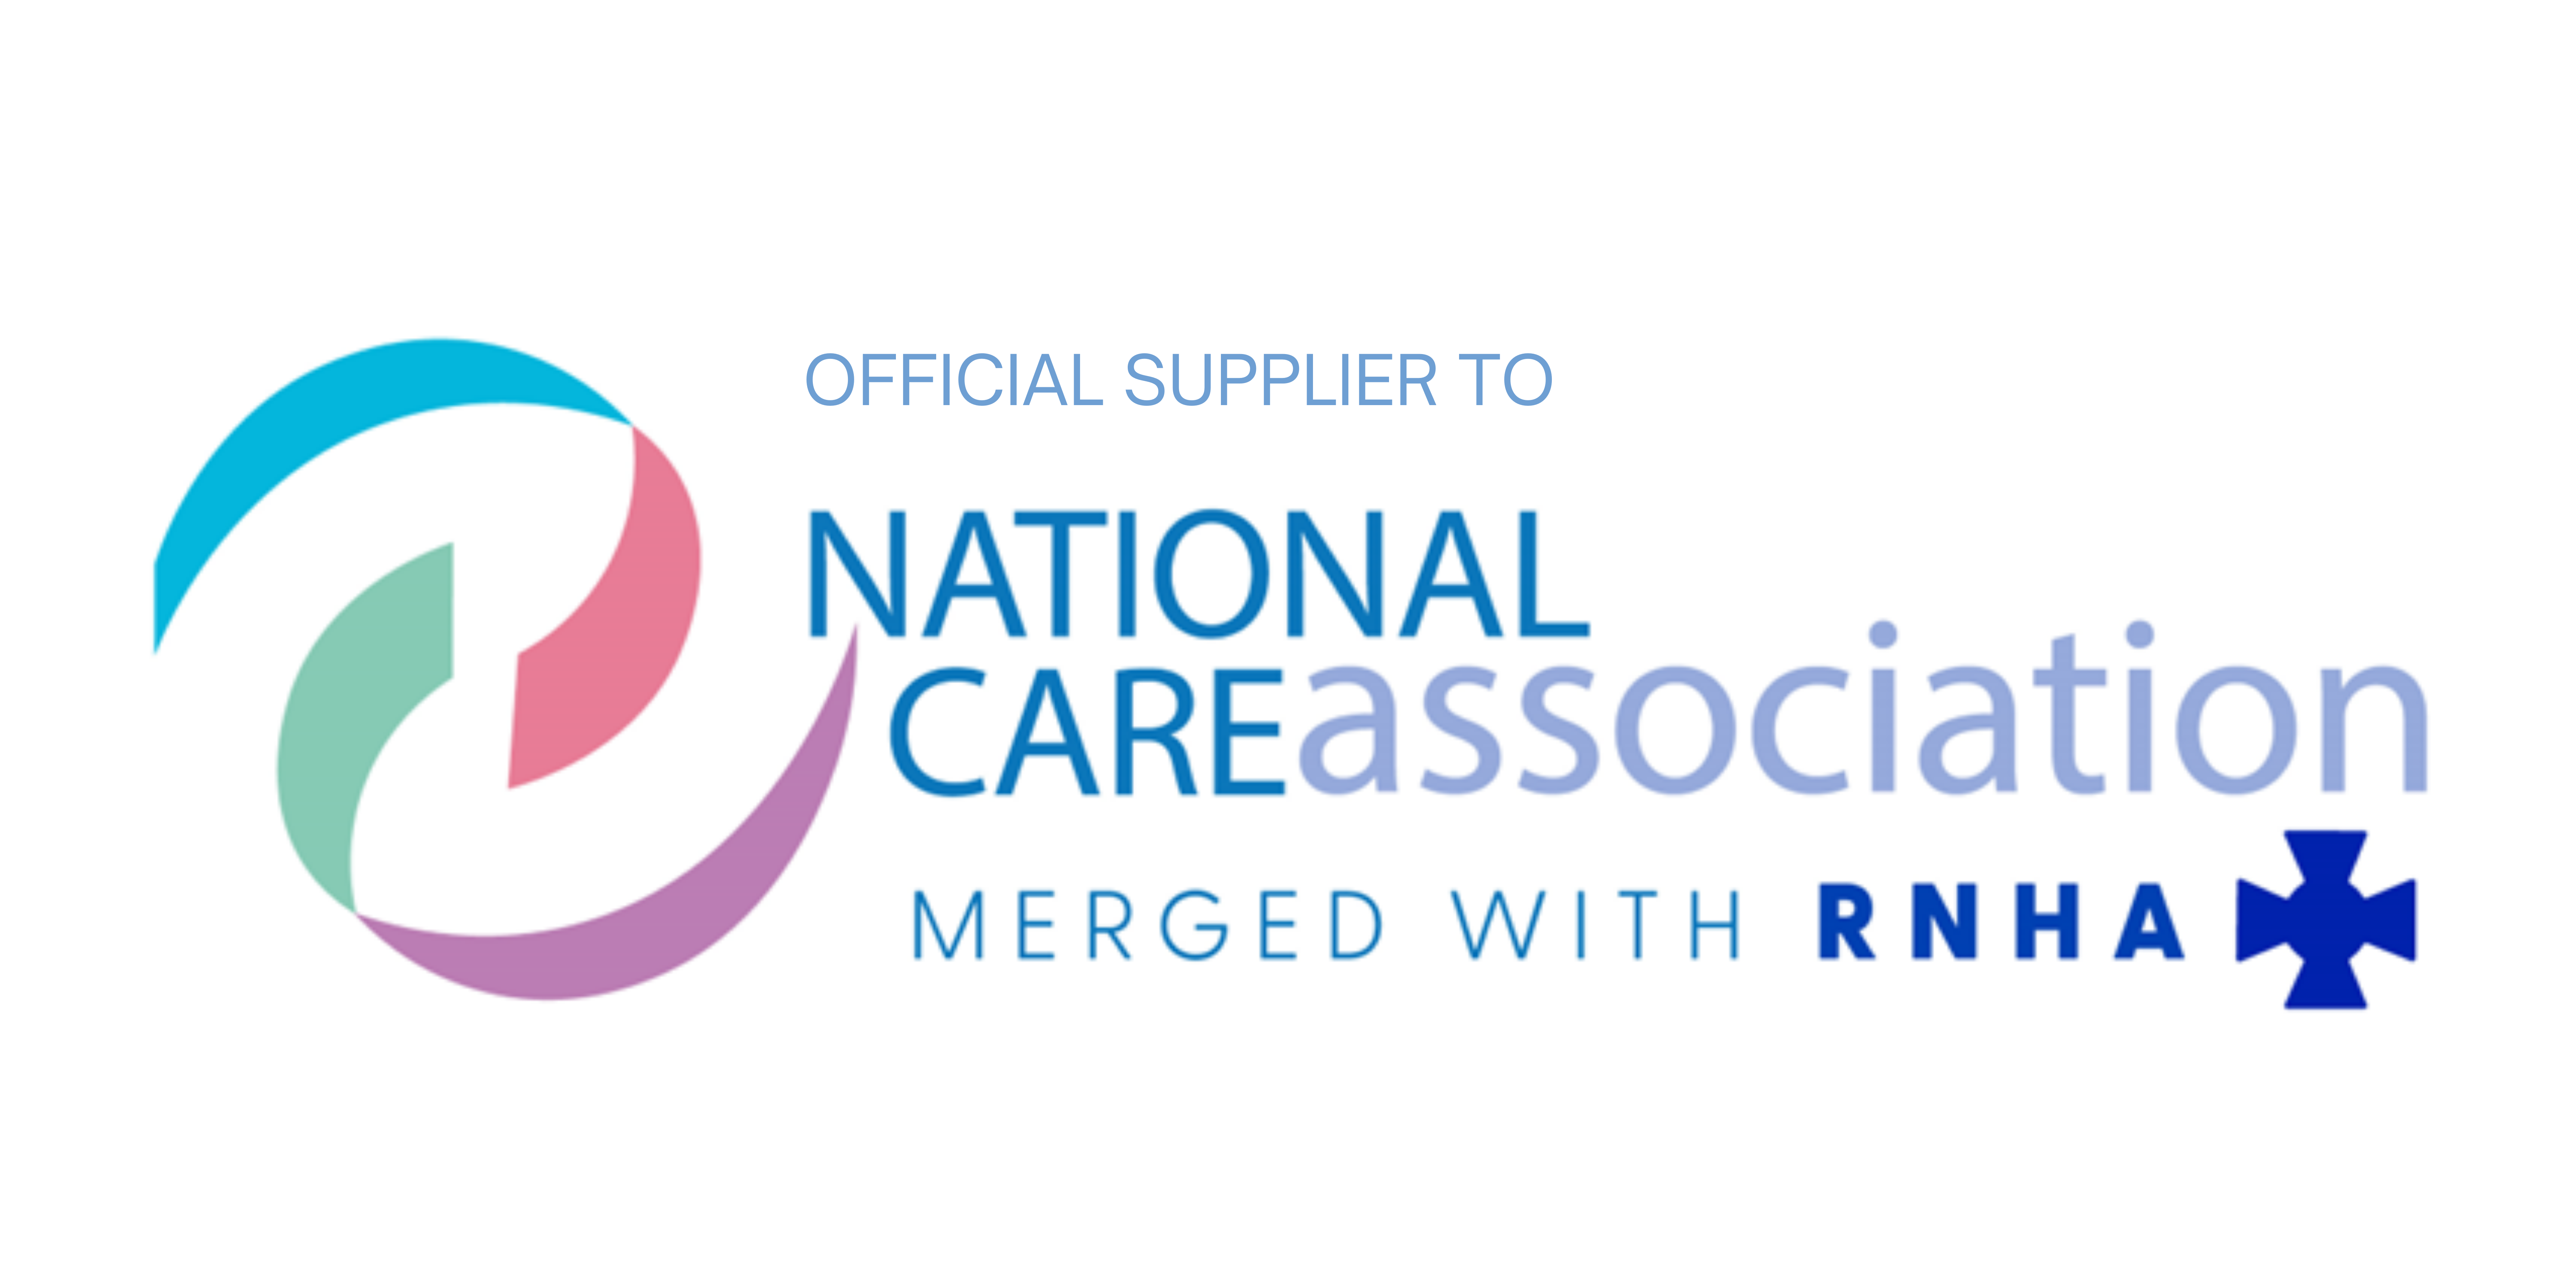 Official Supplier to National Care Association